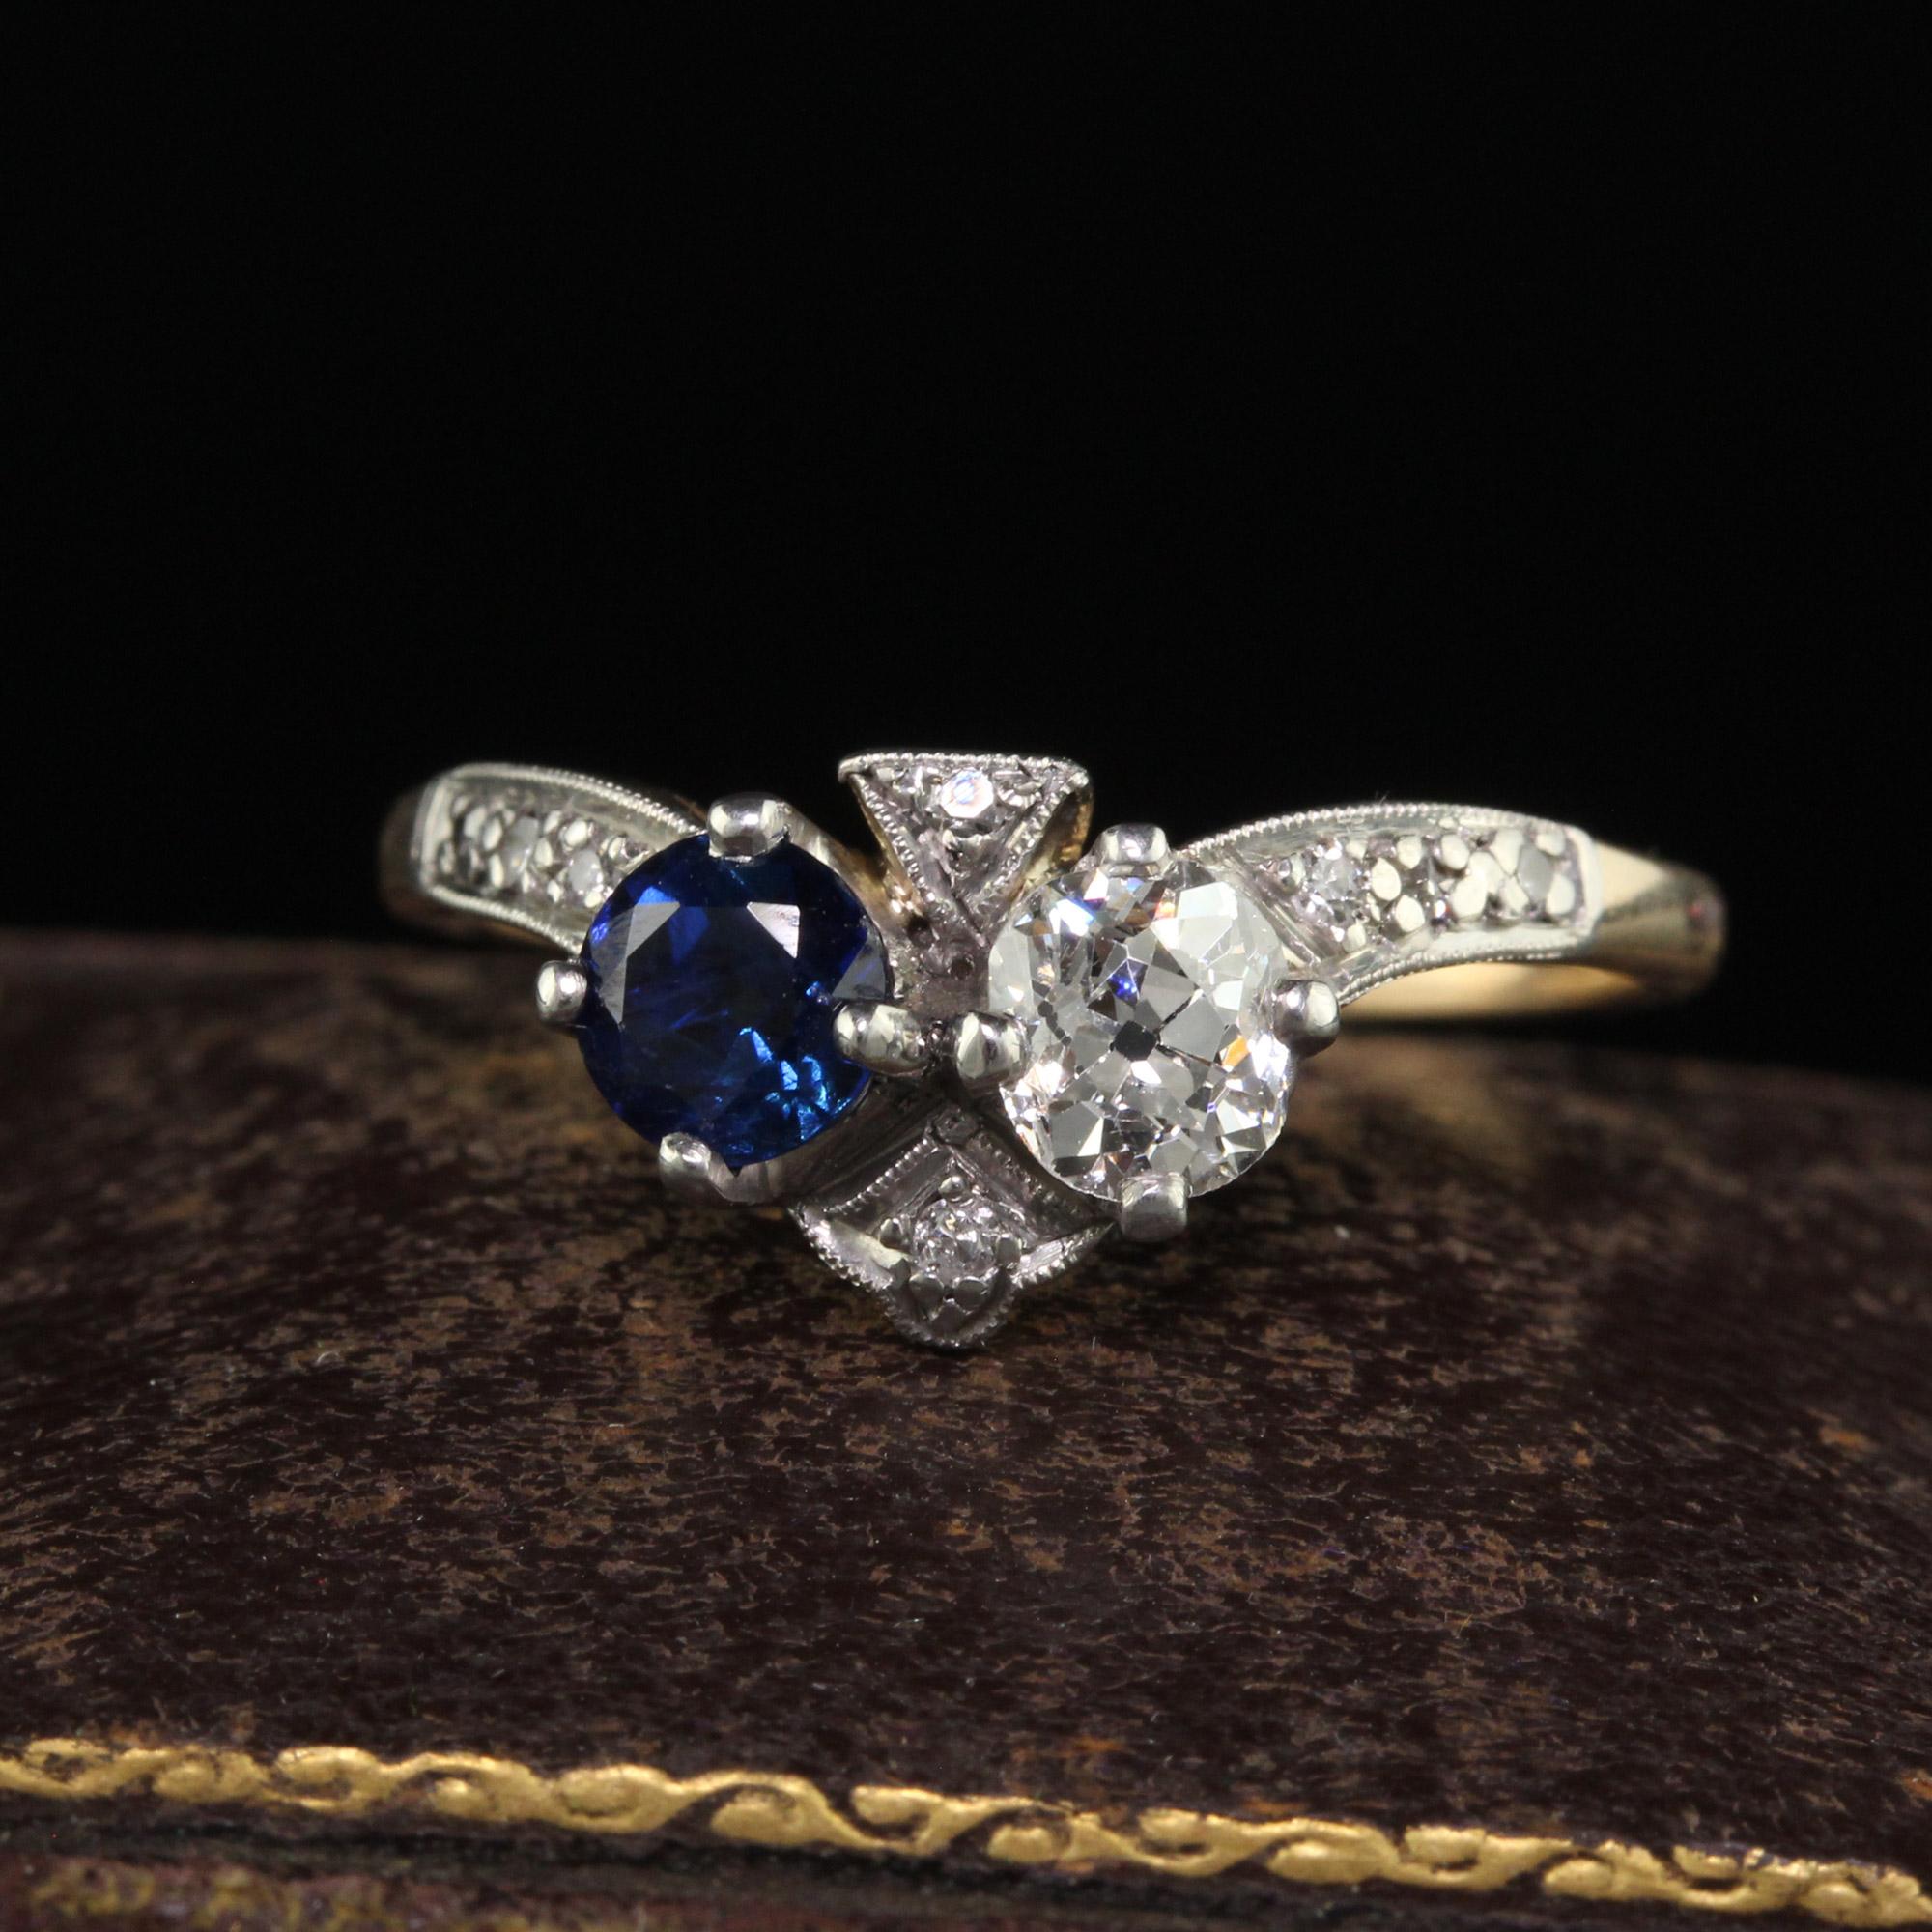 Beautiful Antique Edwardian 14K Yellow Gold Platinum Old Euro Diamond and Sapphire Ring. This gorgeous Edwardian diamond and sapphire ring is crafted in 14k yellow gold and platinum. The top of the ring holds a beautiful white old European cut